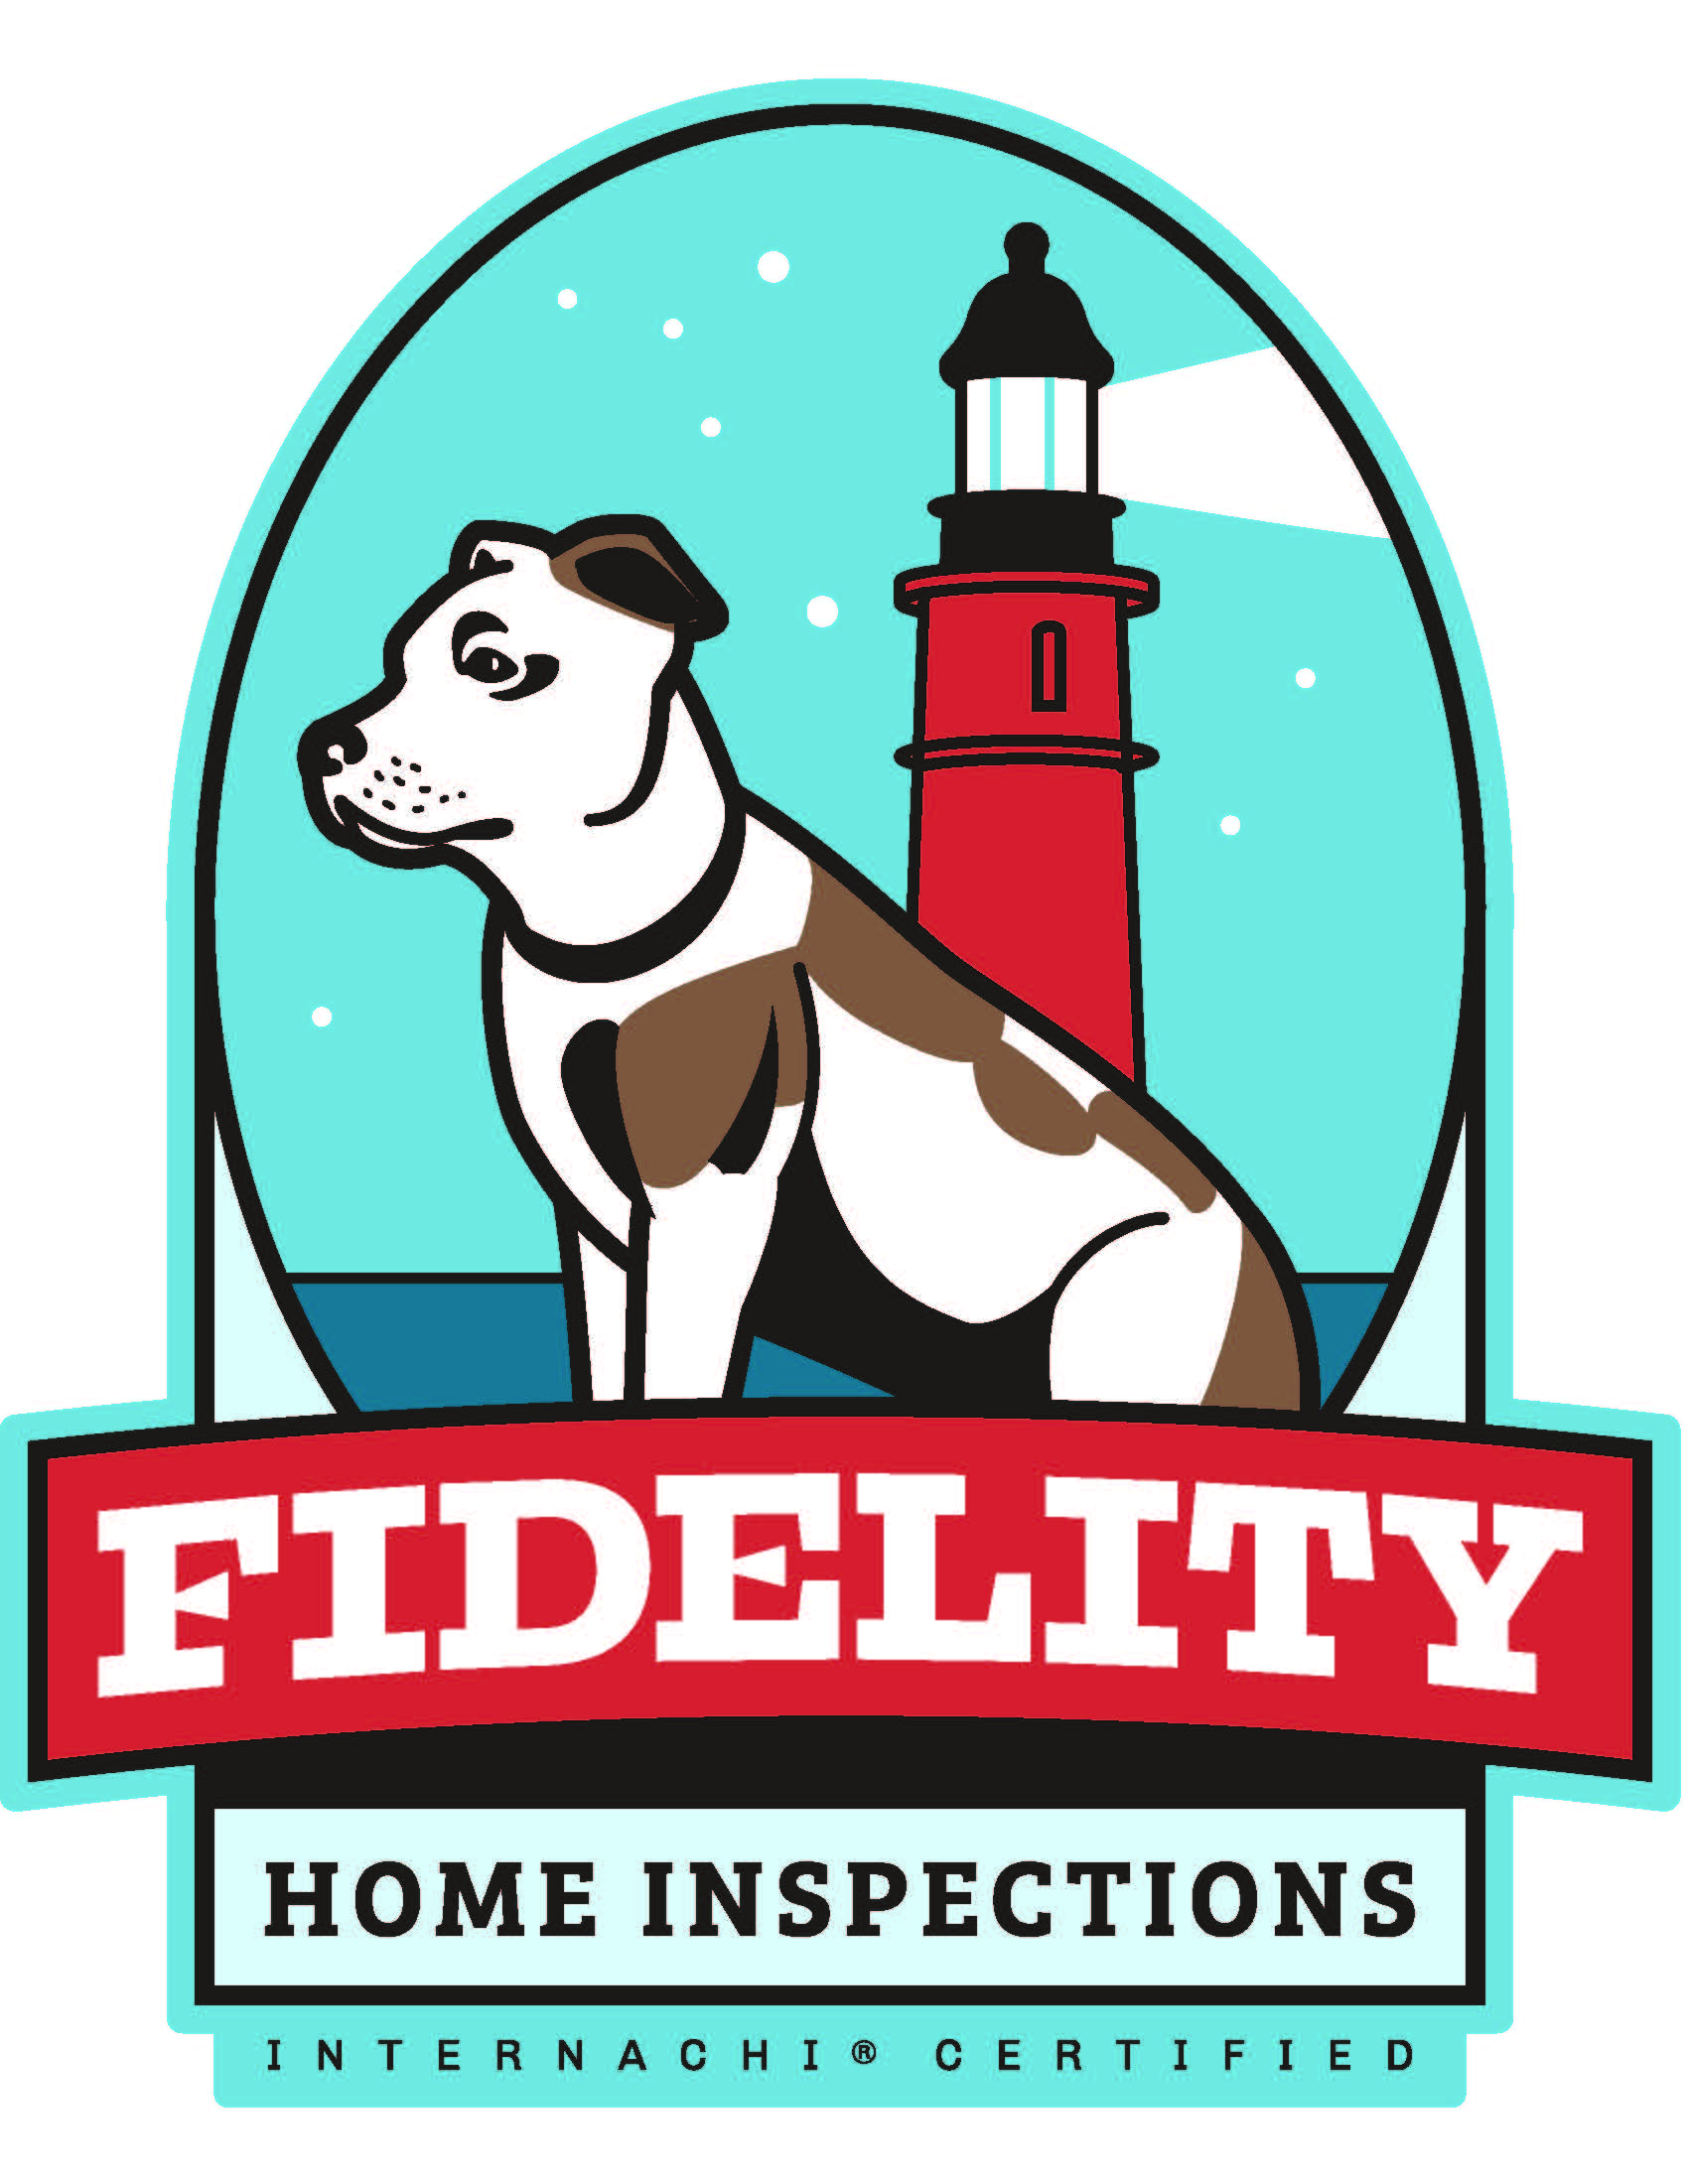 Fidelity Home Inspections